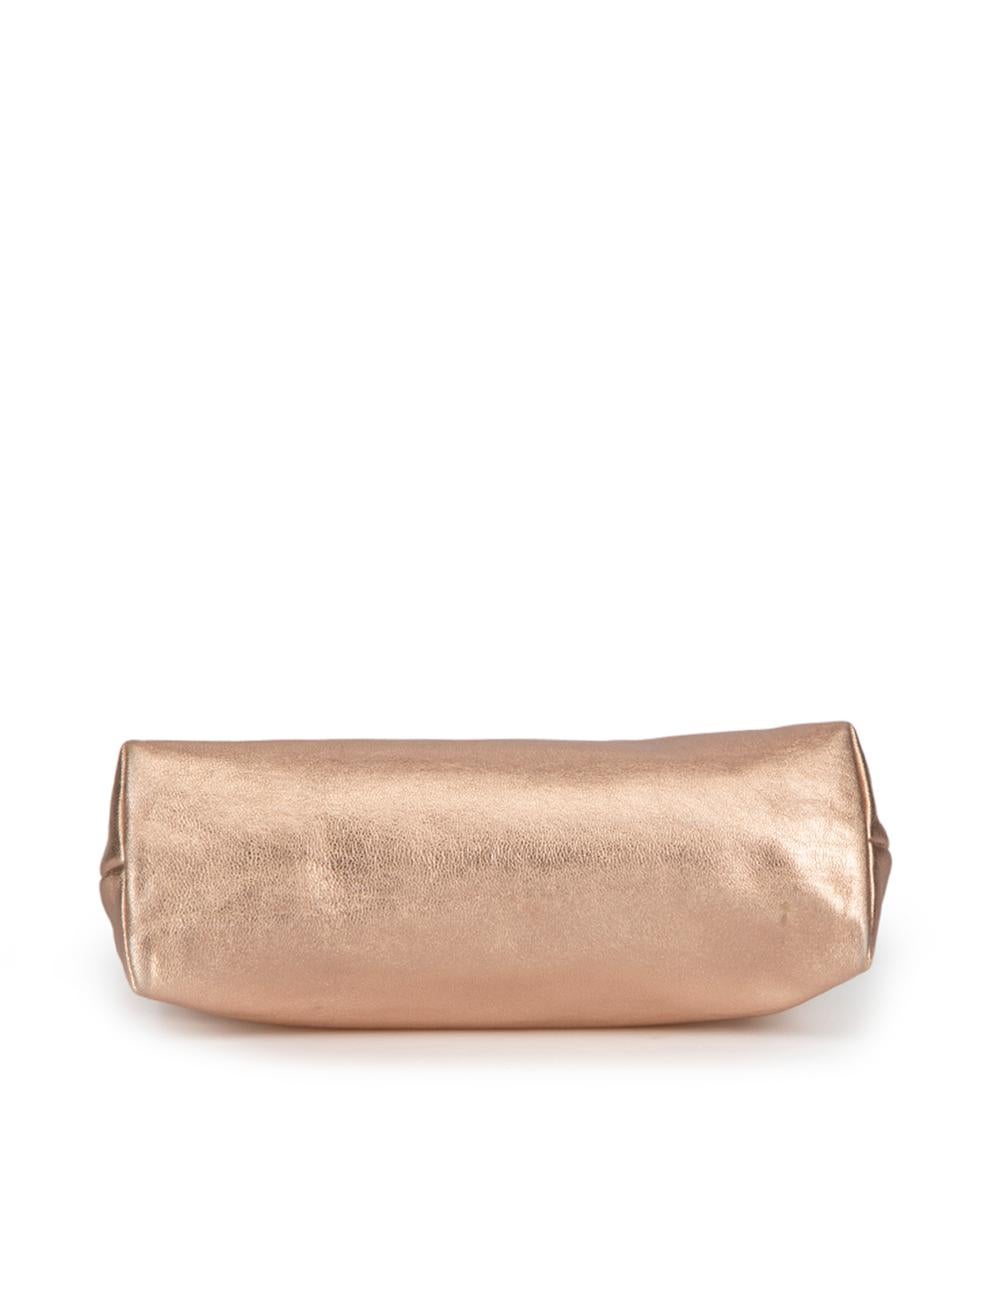 Dolce & Gabbana Women's Pink Metallic Leather Clutch In Good Condition In London, GB